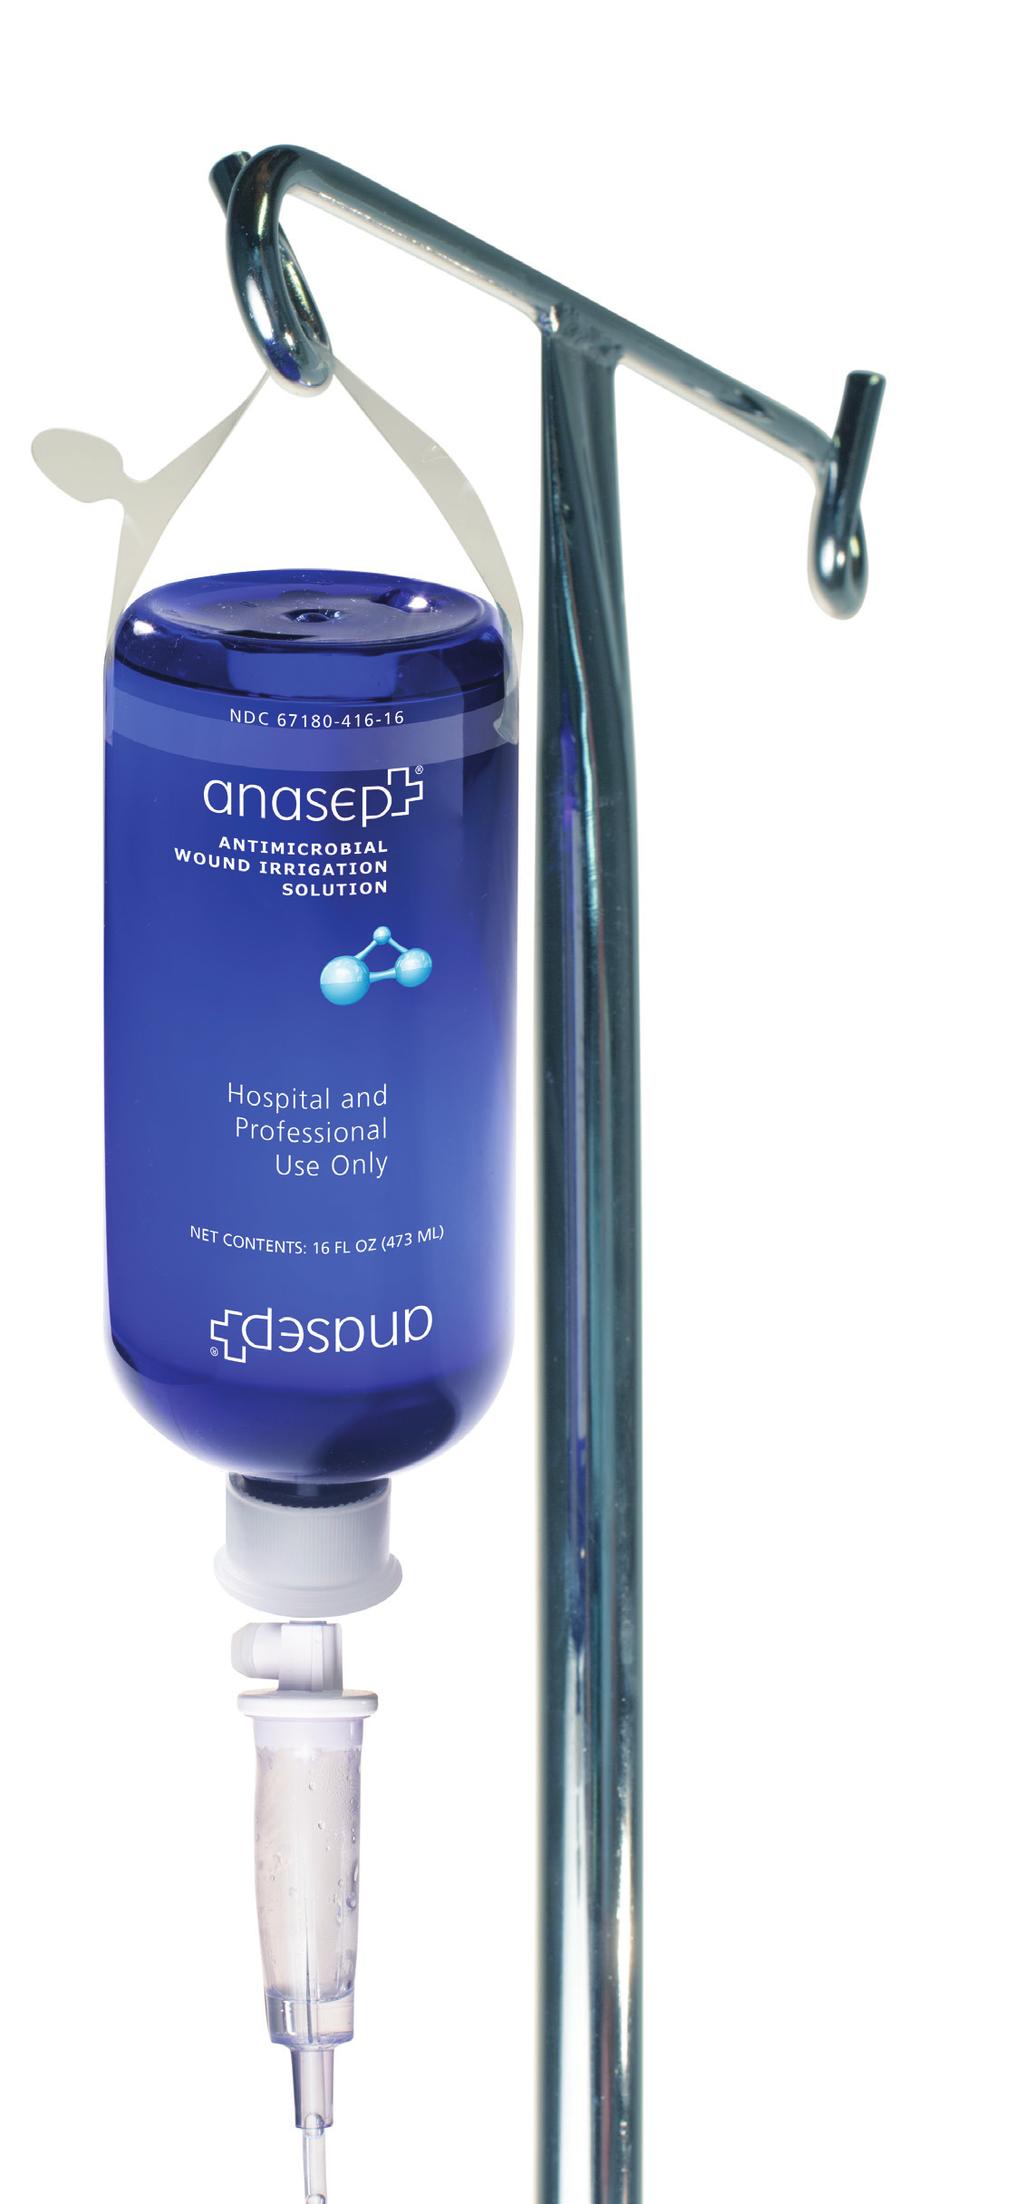 Antimicrobial Wound Irrigation Solution Anasept Antimicrobial Wound Irrigation Solution is a breakthrough in wound care.